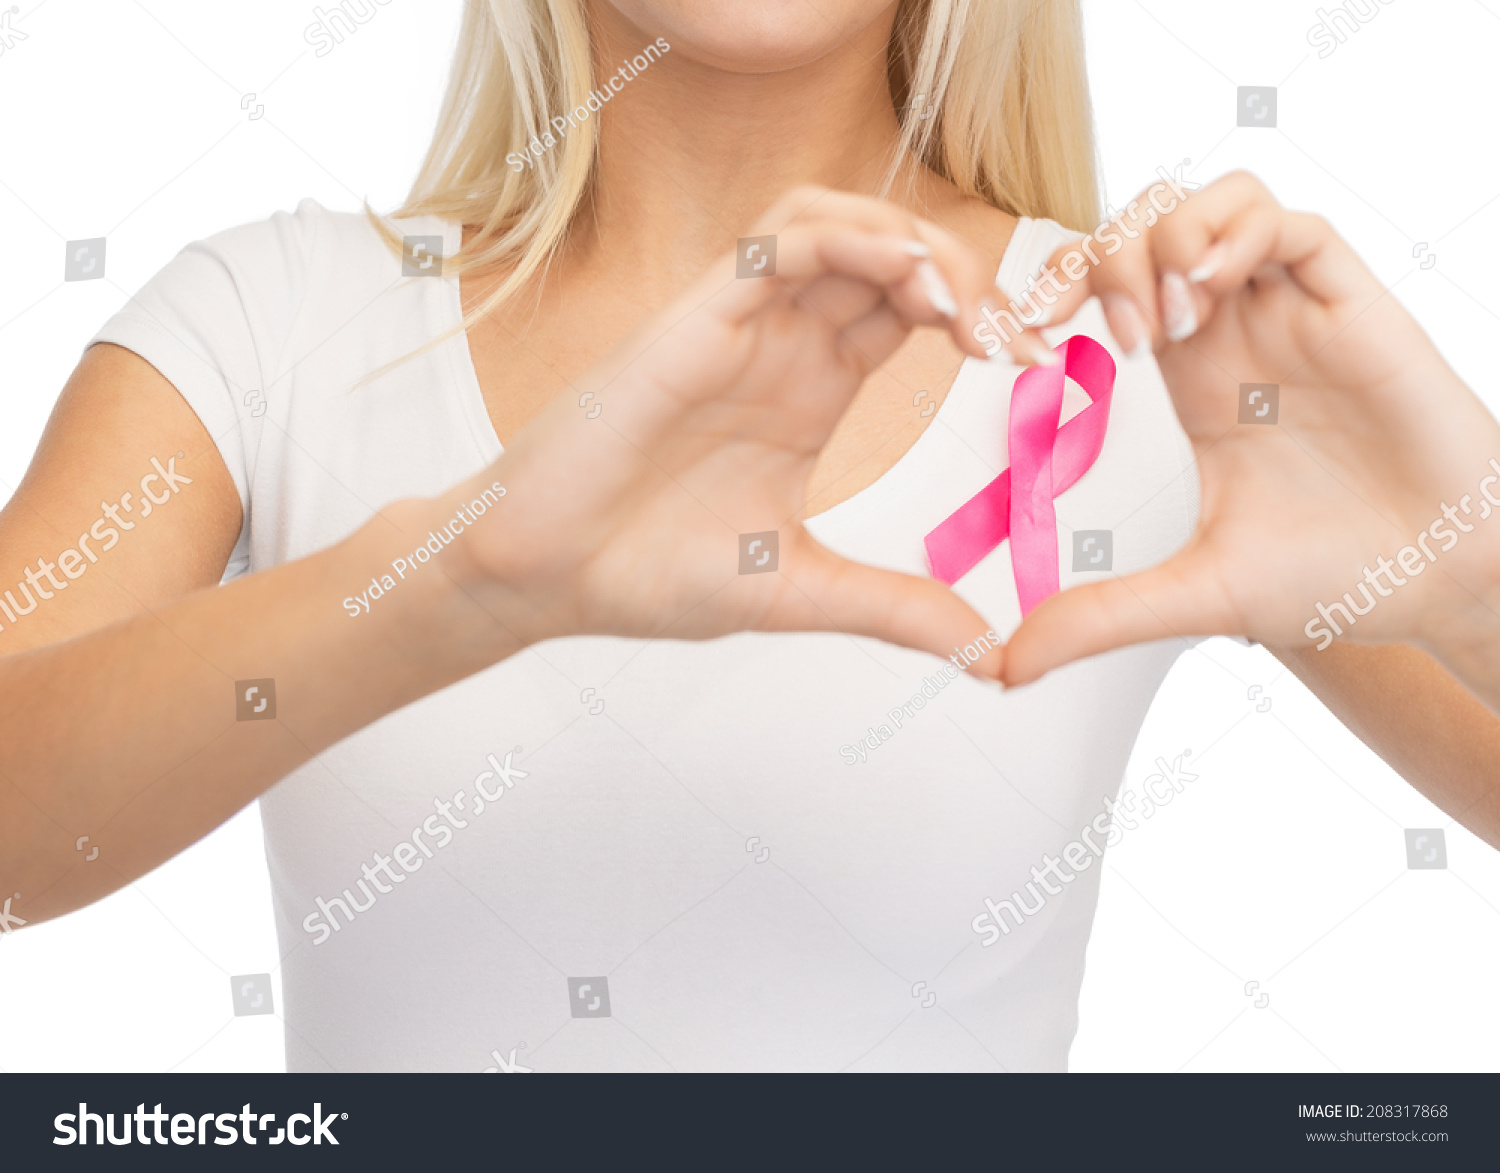 healthcare and medicine concept - young woman in blank white t-shirt with pink breast cancer awareness ribbon showing heart shape #208317868